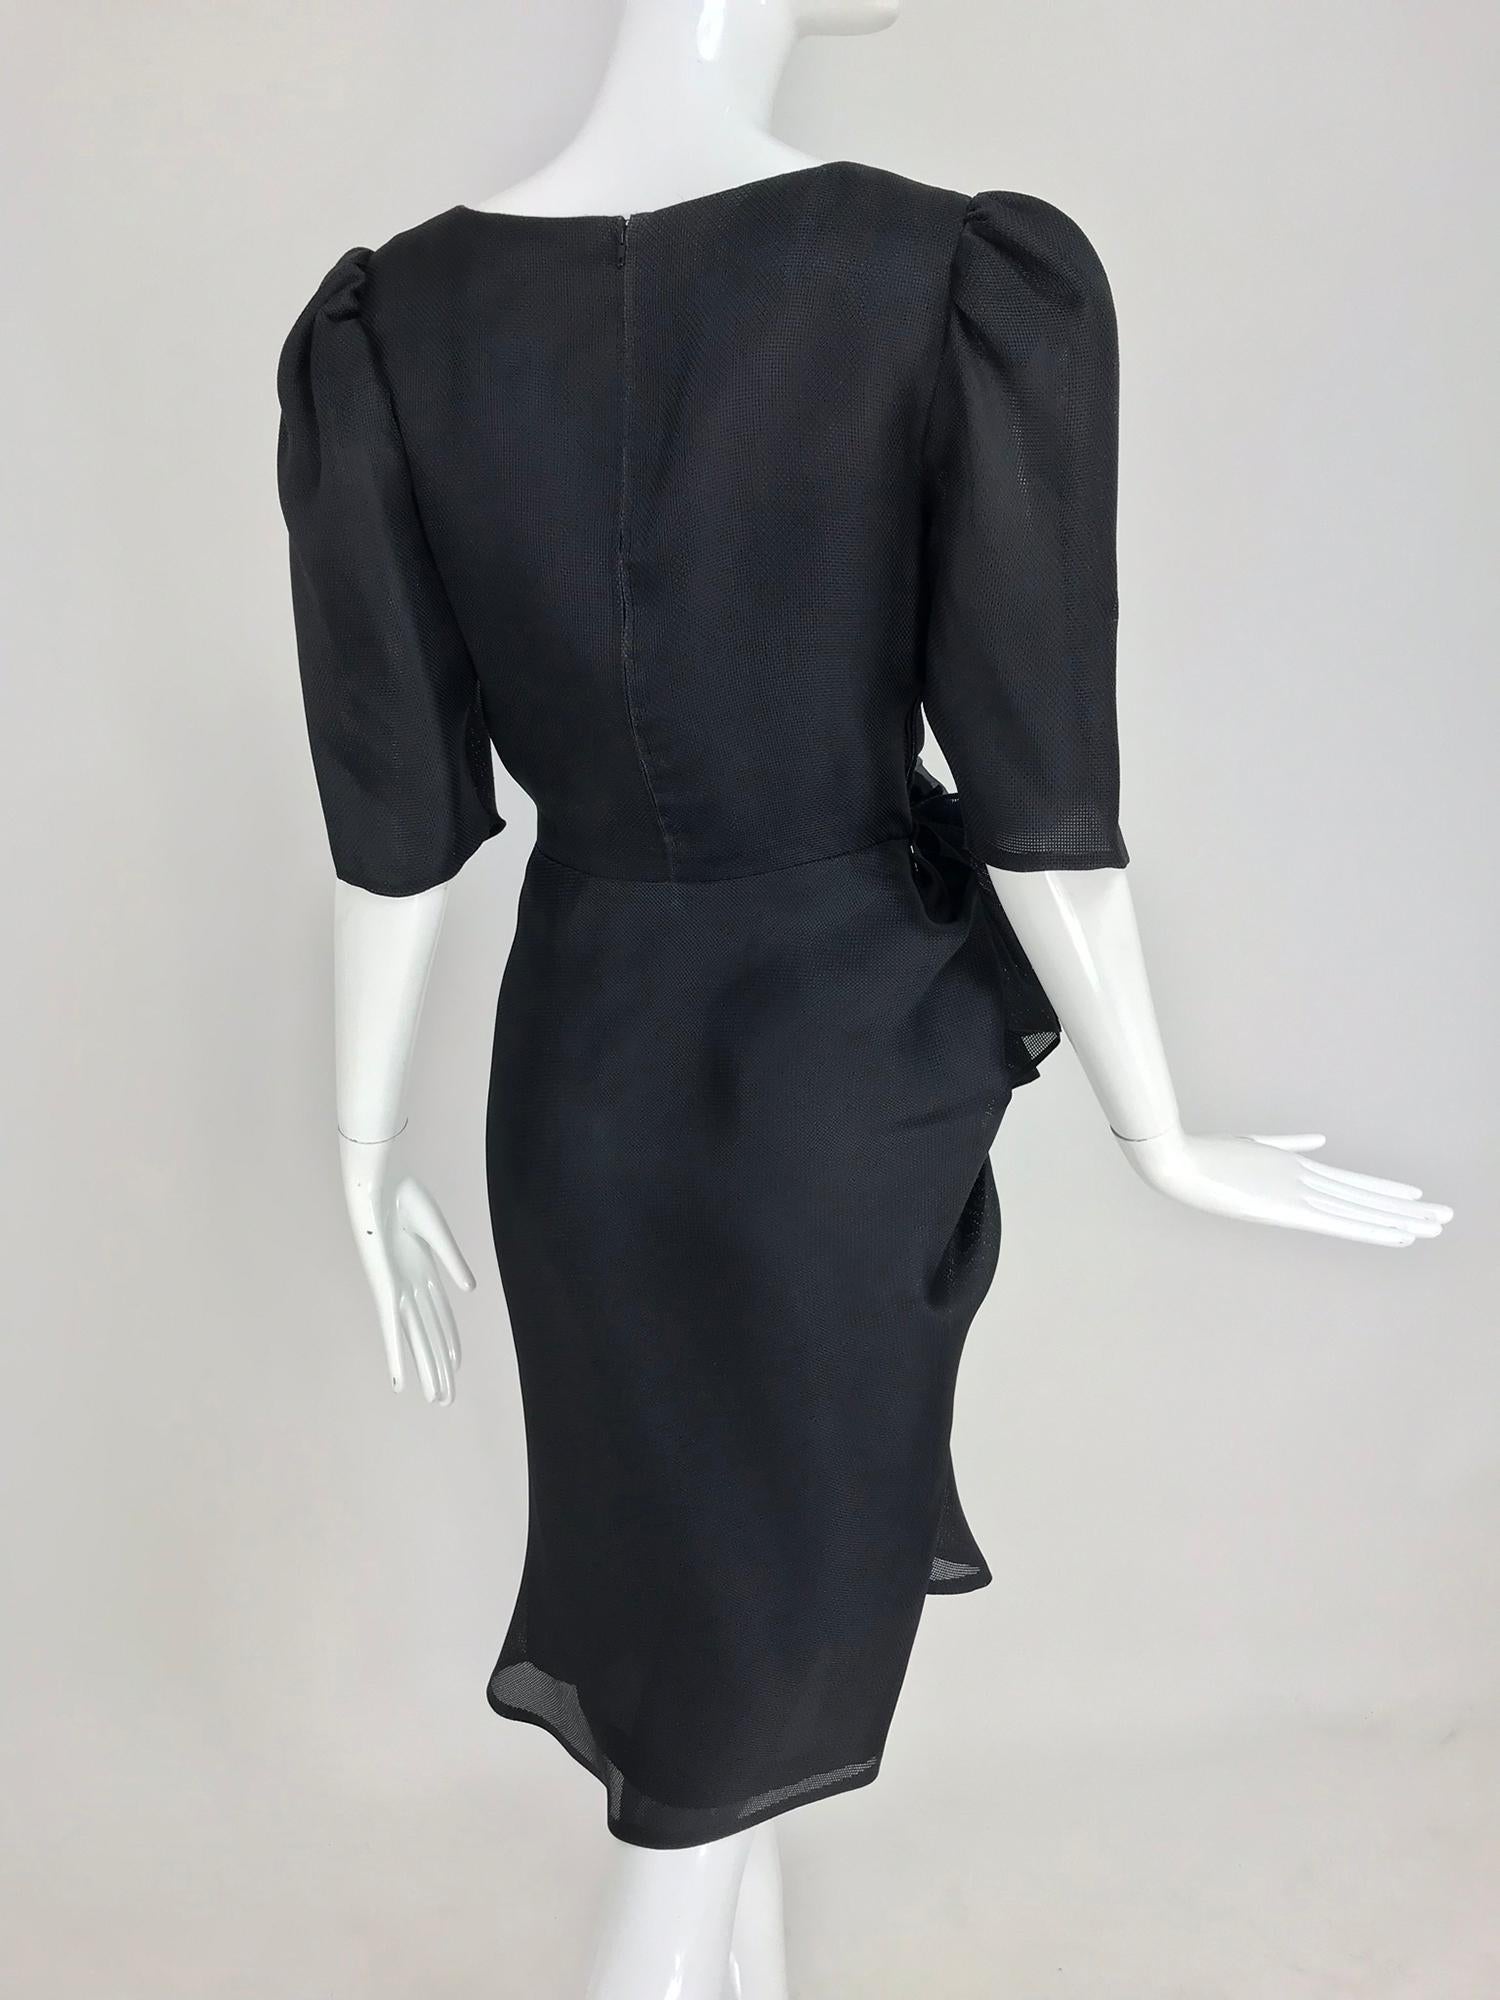 Givency Black Textured Silk Dress with Hip Bow 1990s For Sale 3